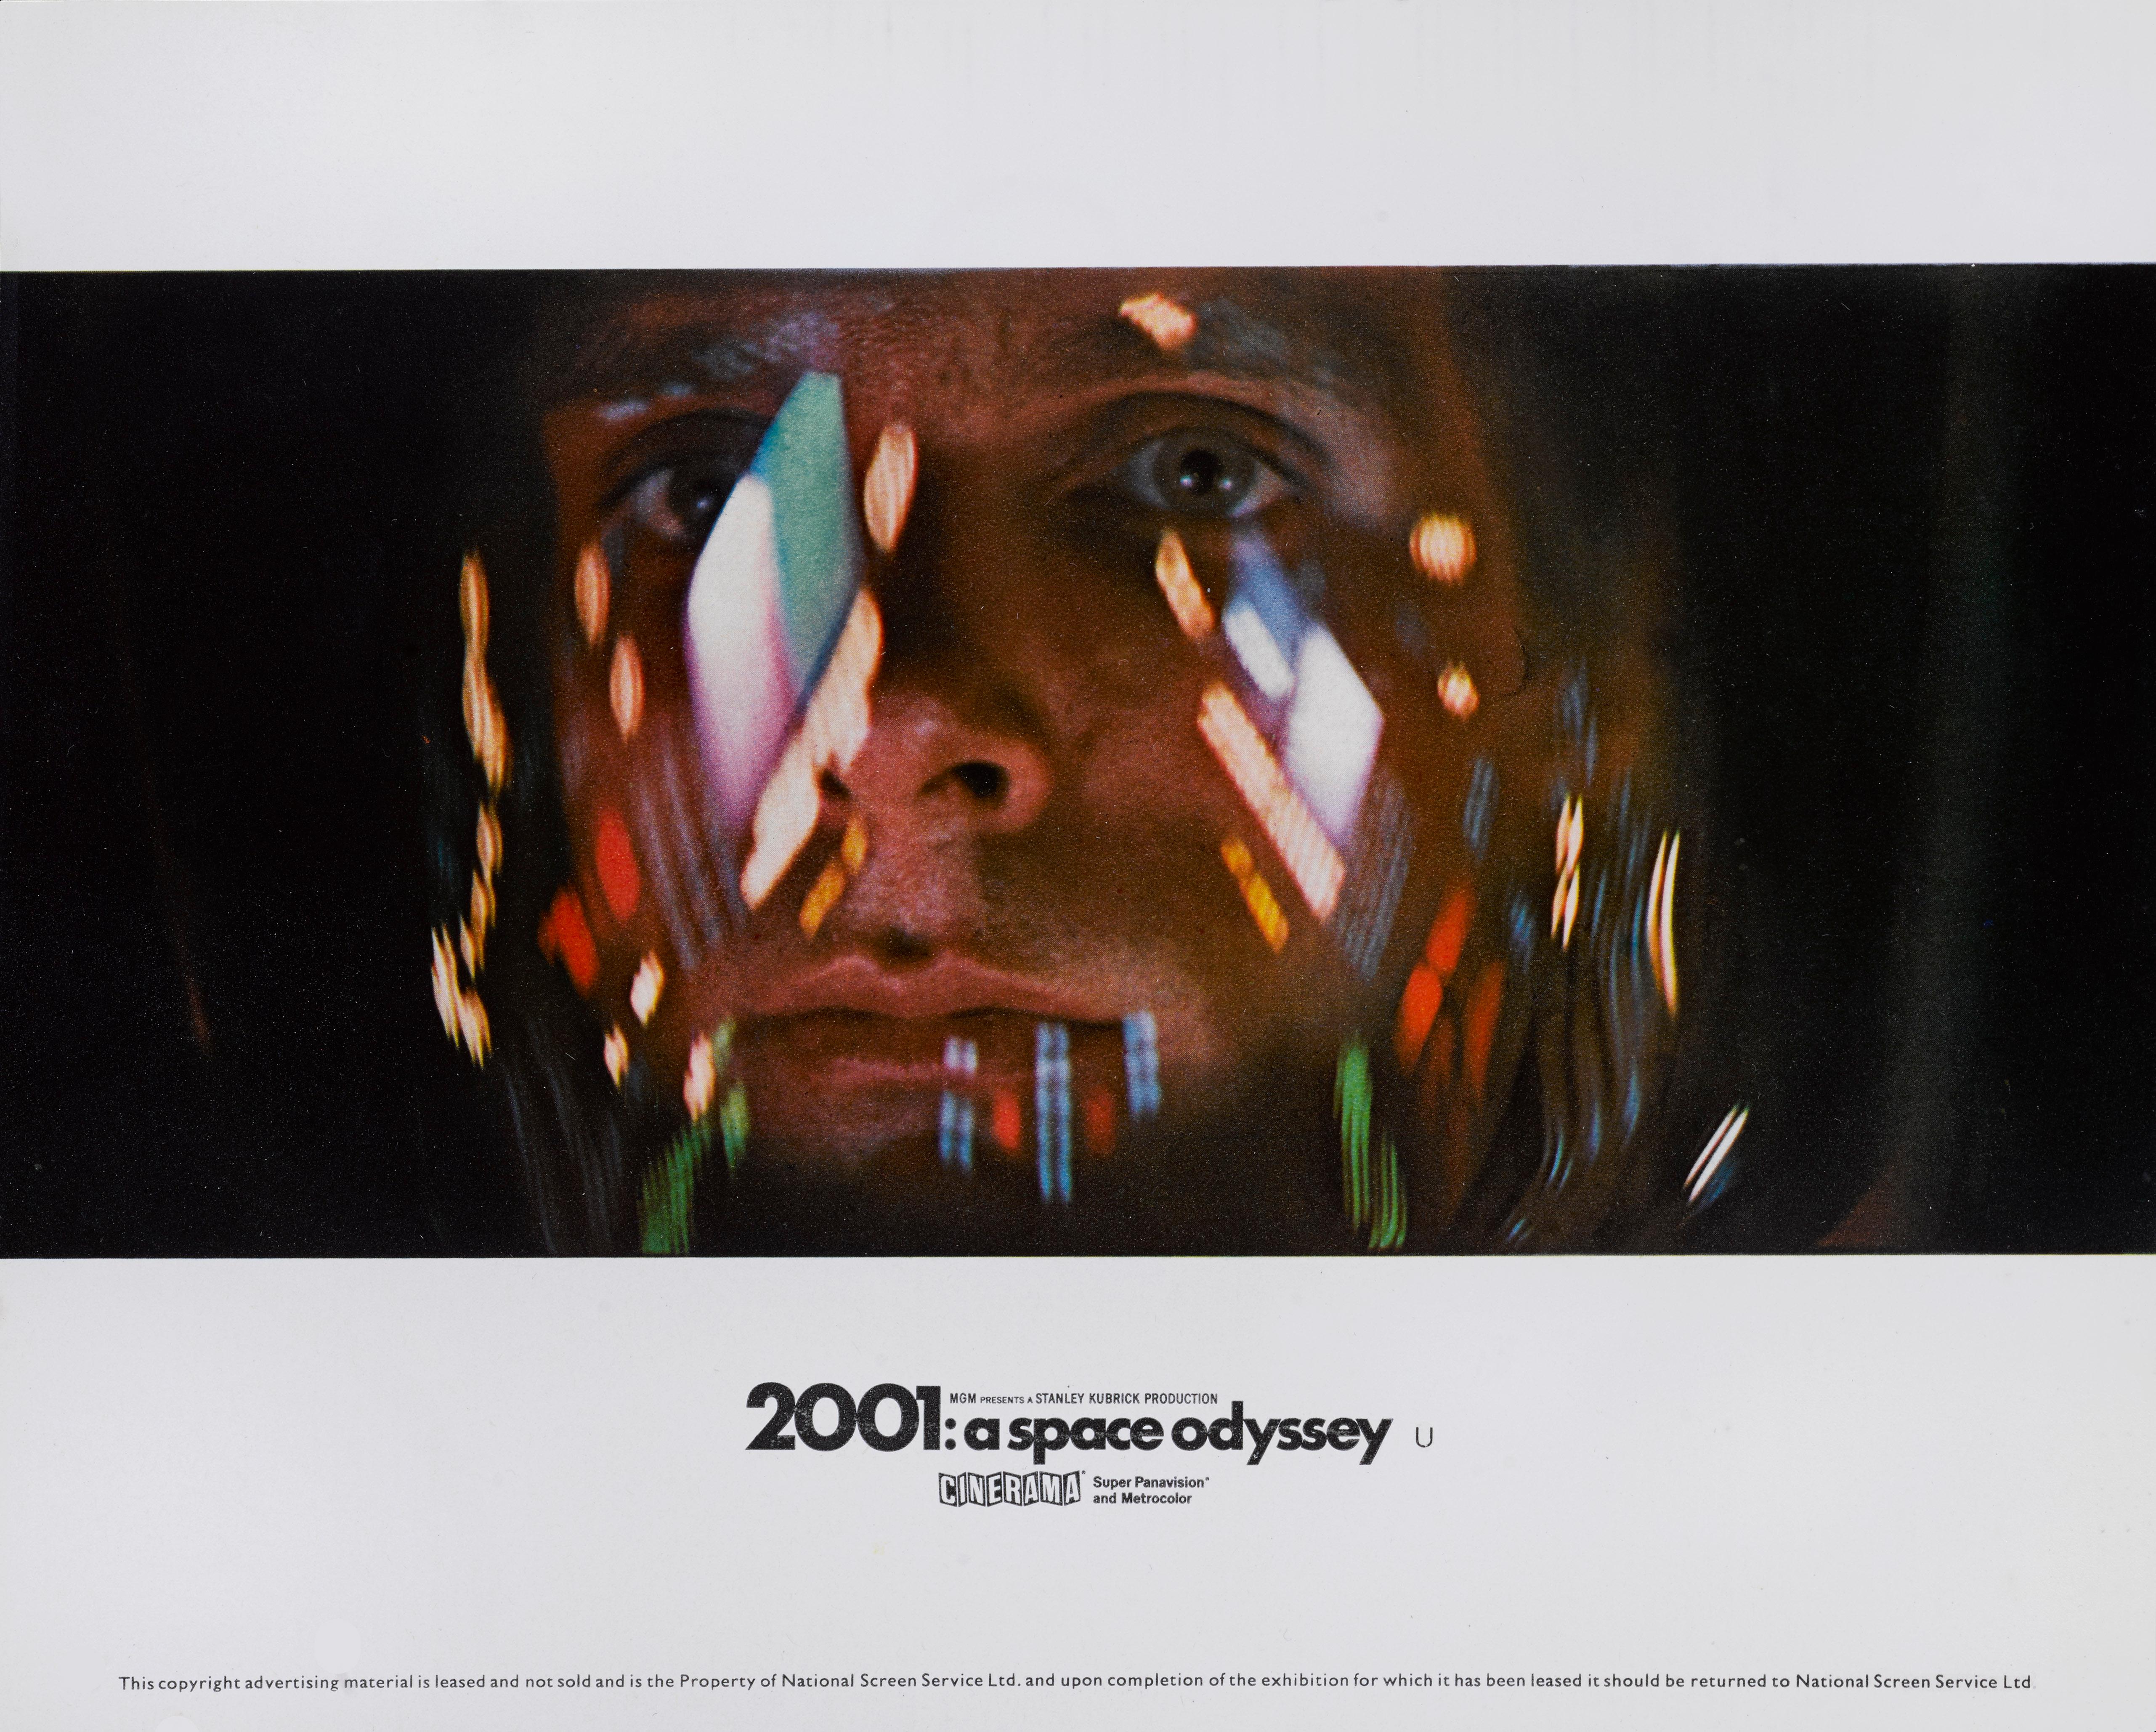 American 2001: A Space Odyssey